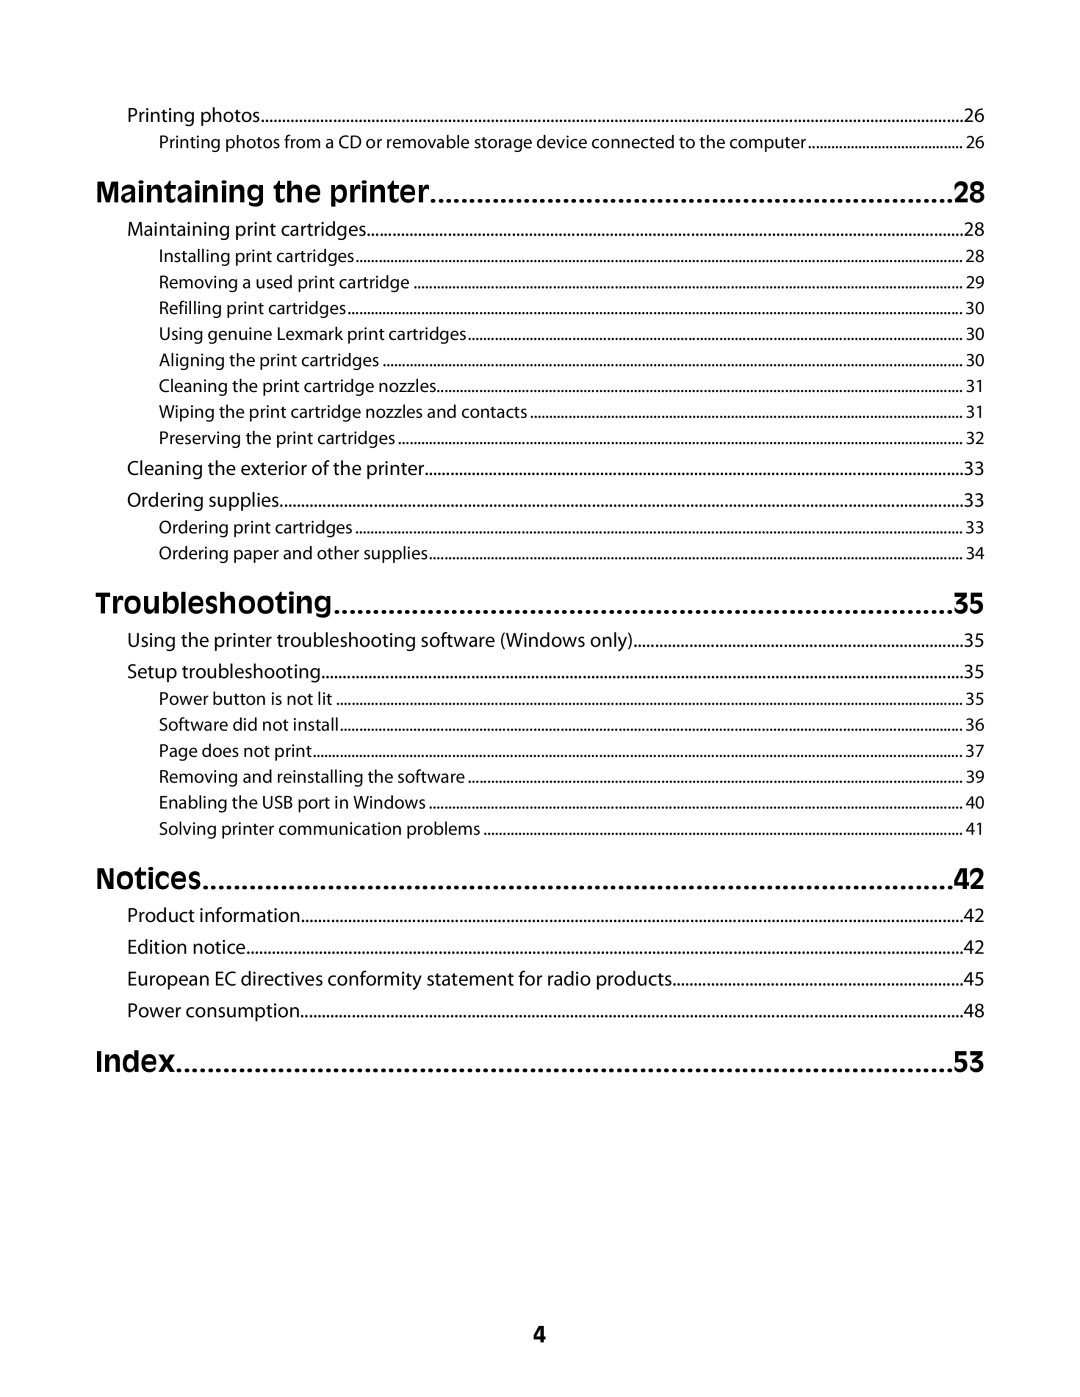 Lexmark Z2300 manual Notices, Index, Maintaining the printer, Troubleshooting 